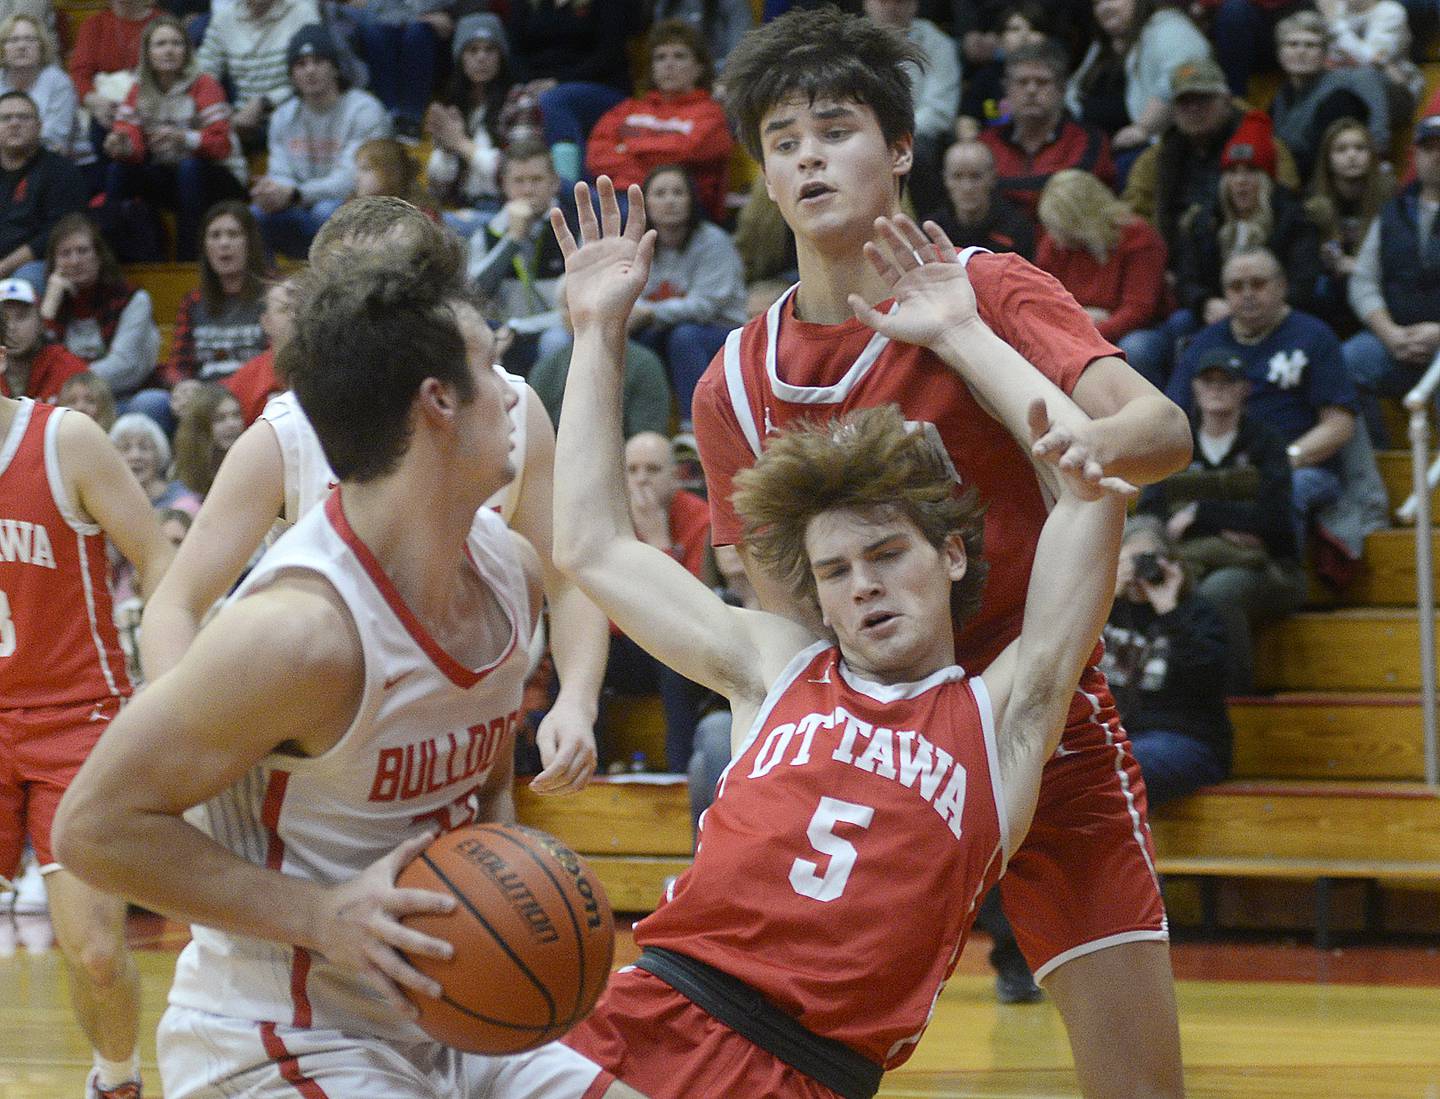 Ottawa's Aiden Mucci (5) falls back after contact with Streator's Christian Benning on Saturday, Dec. 10, 2022, at Pops Dale Gymnasium in Streator.